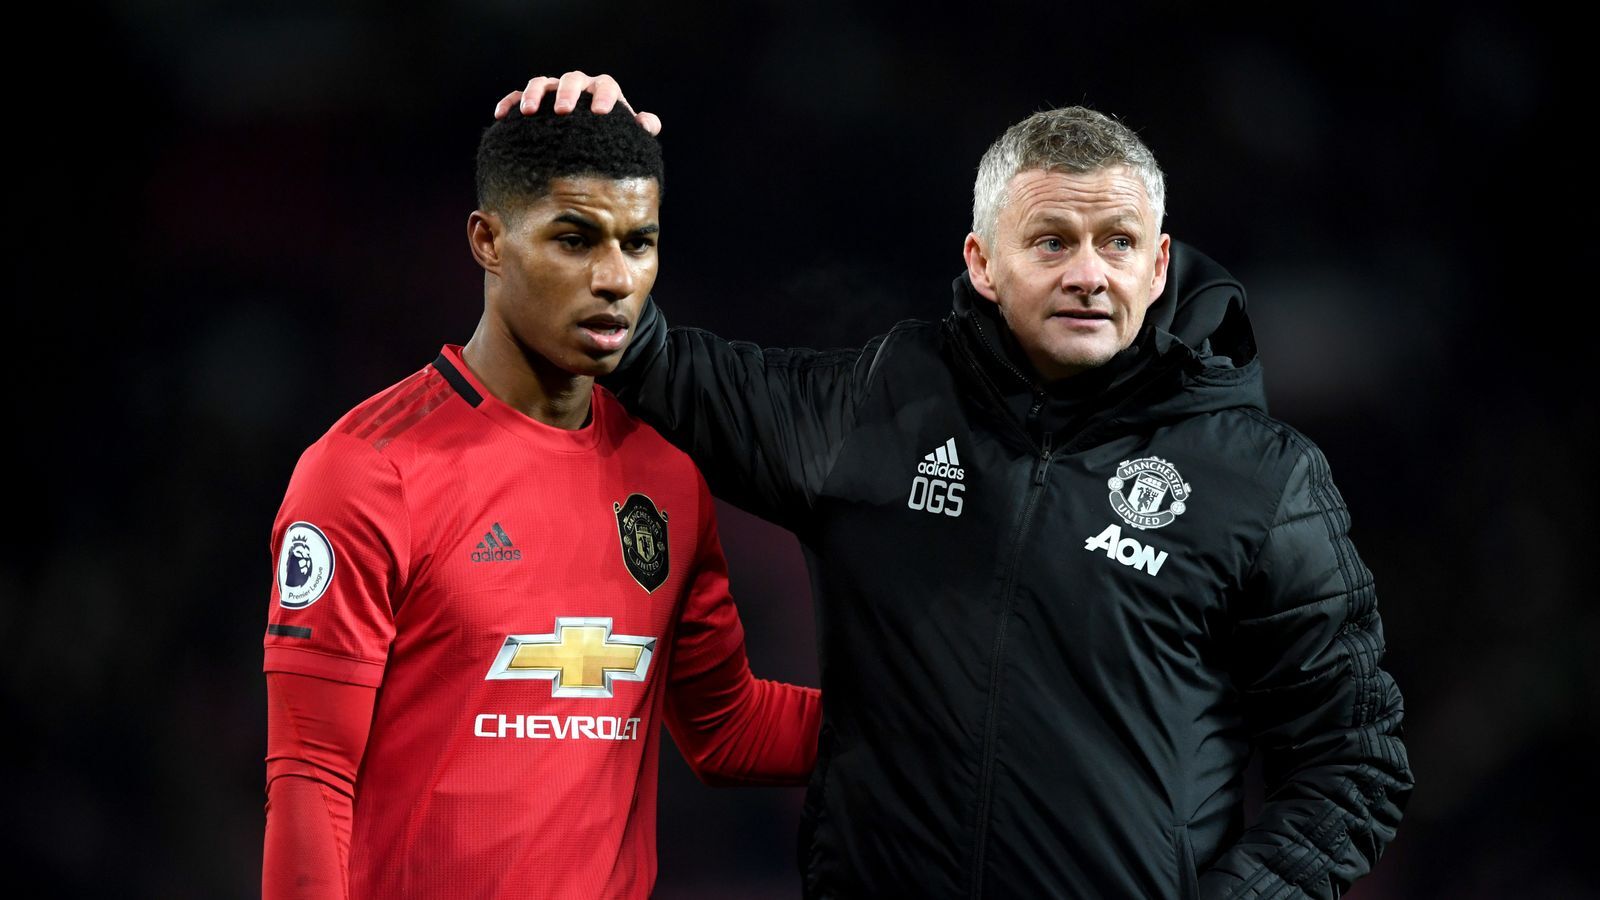 Ole Gunnar Solskjaer expects Marcus Rashford to be back in the Manchester United goals